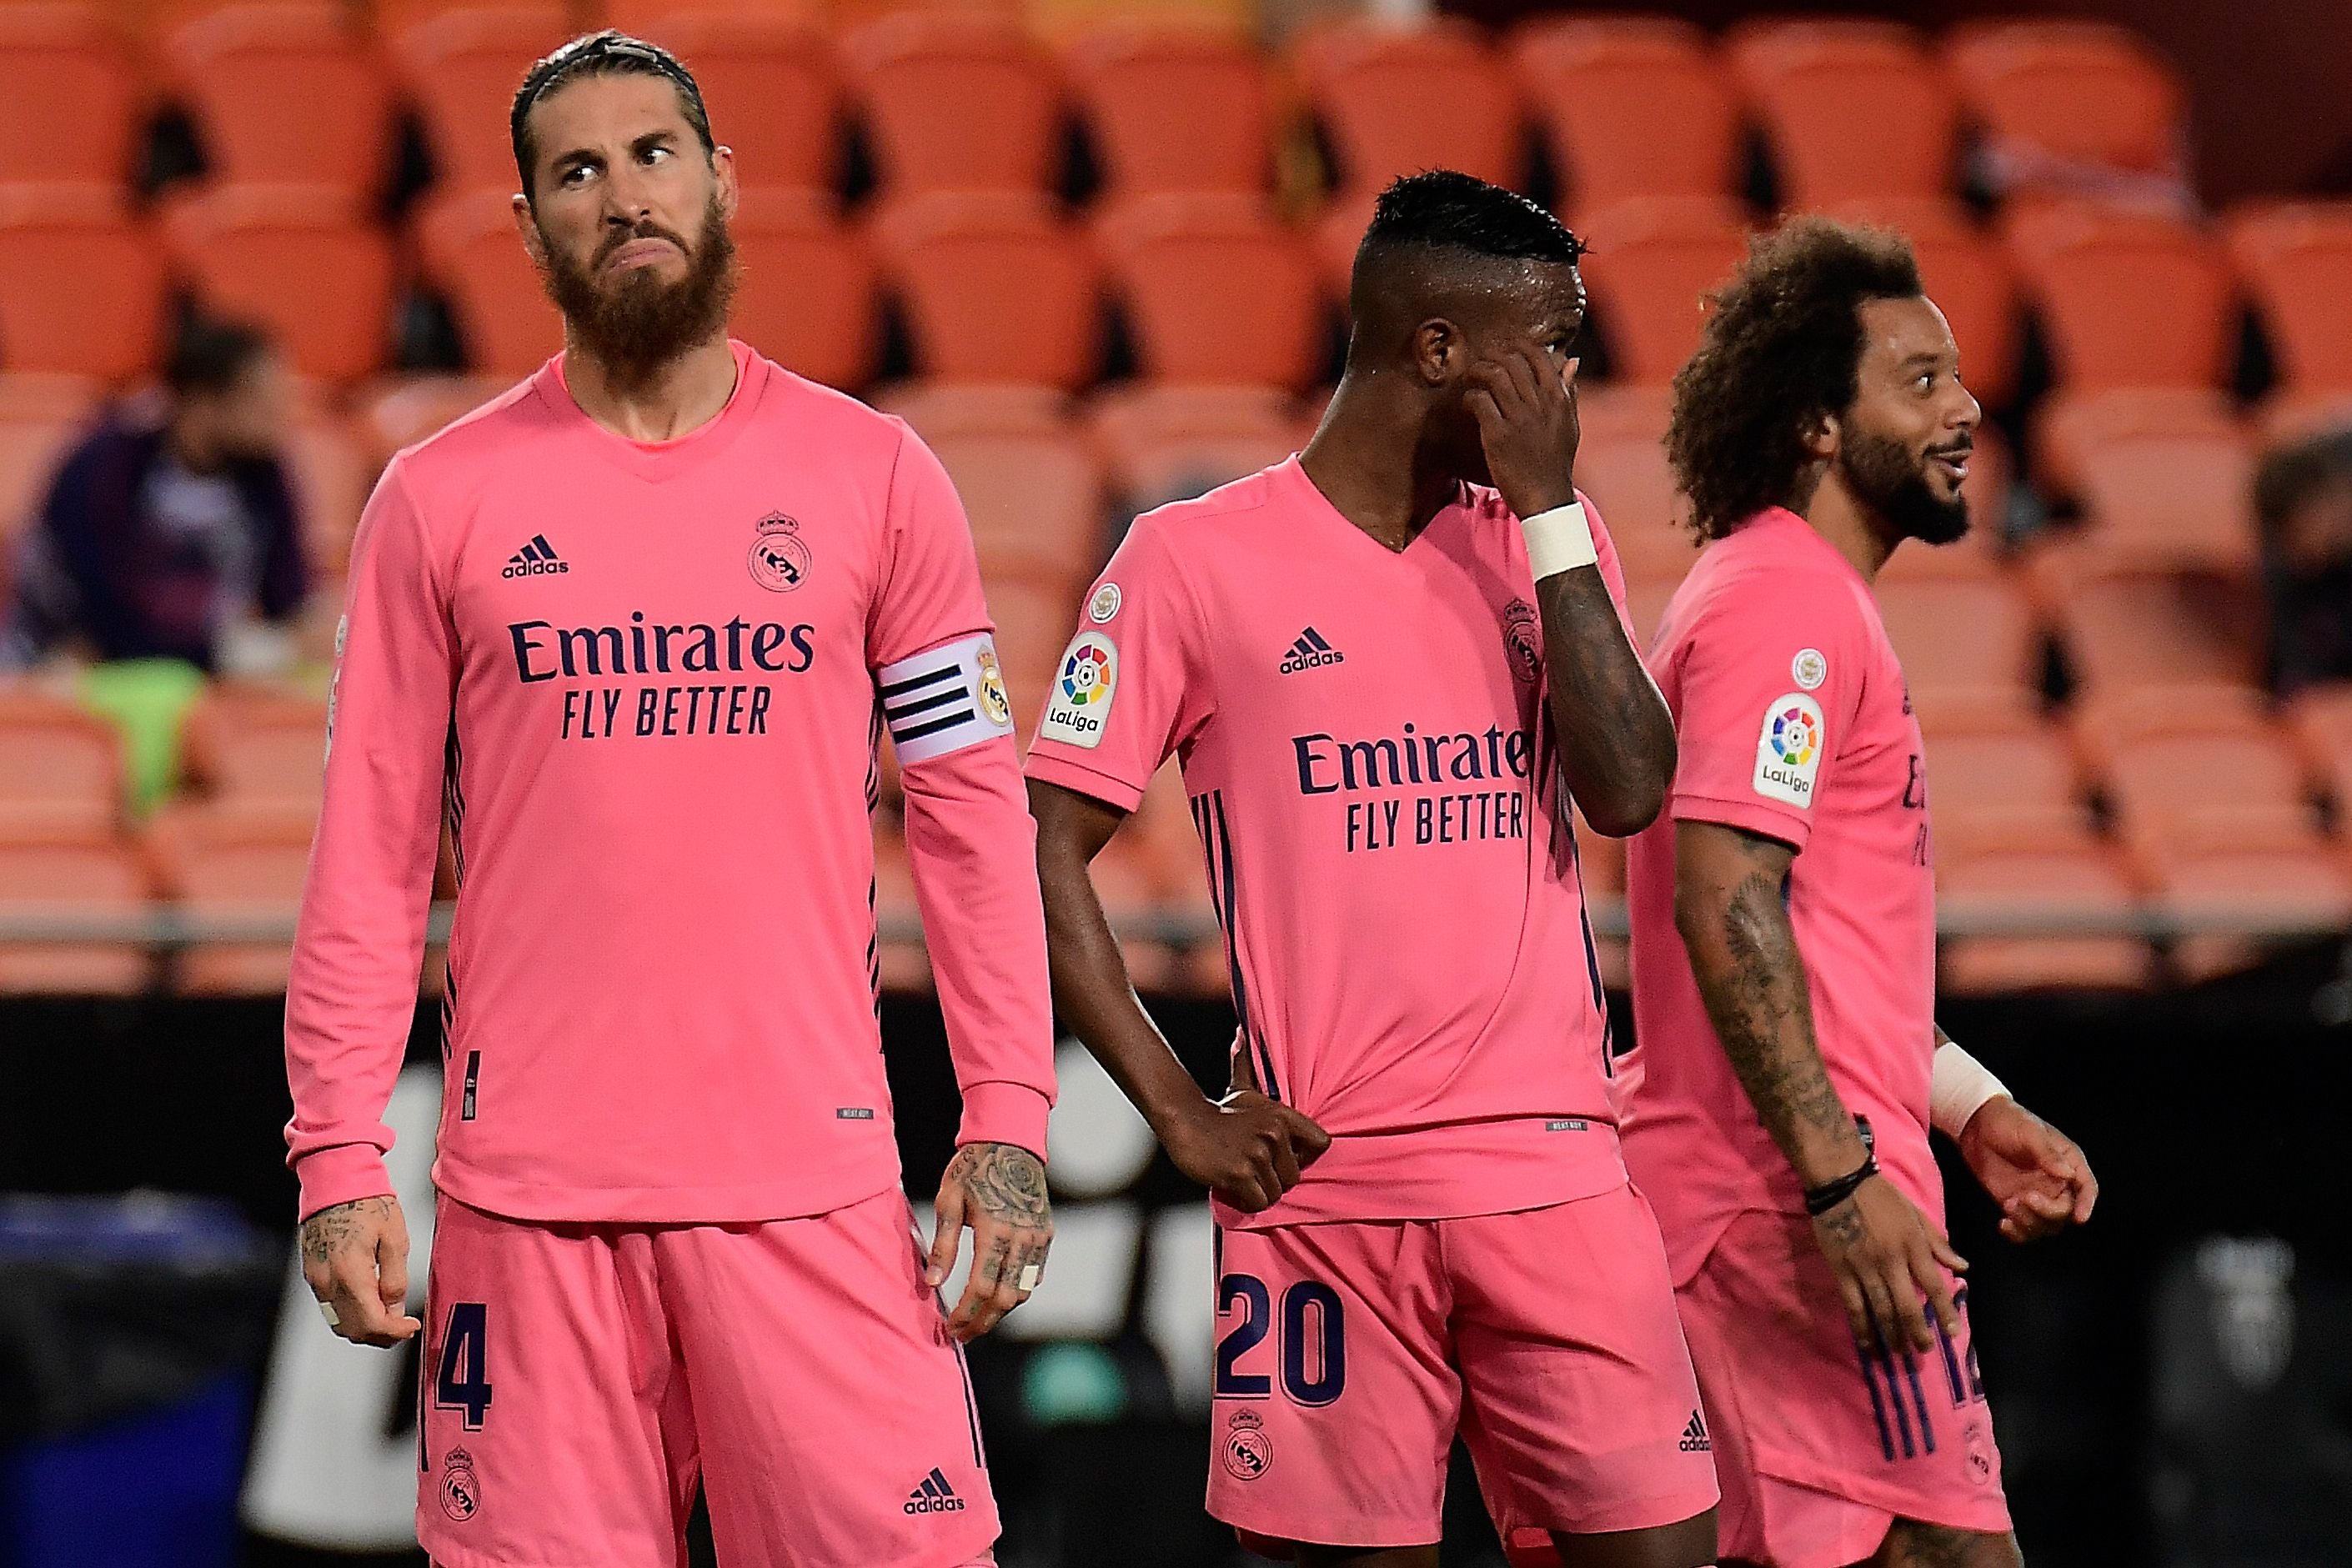 Real Madrid suffered a heavy 4-1 defeat at Valencia